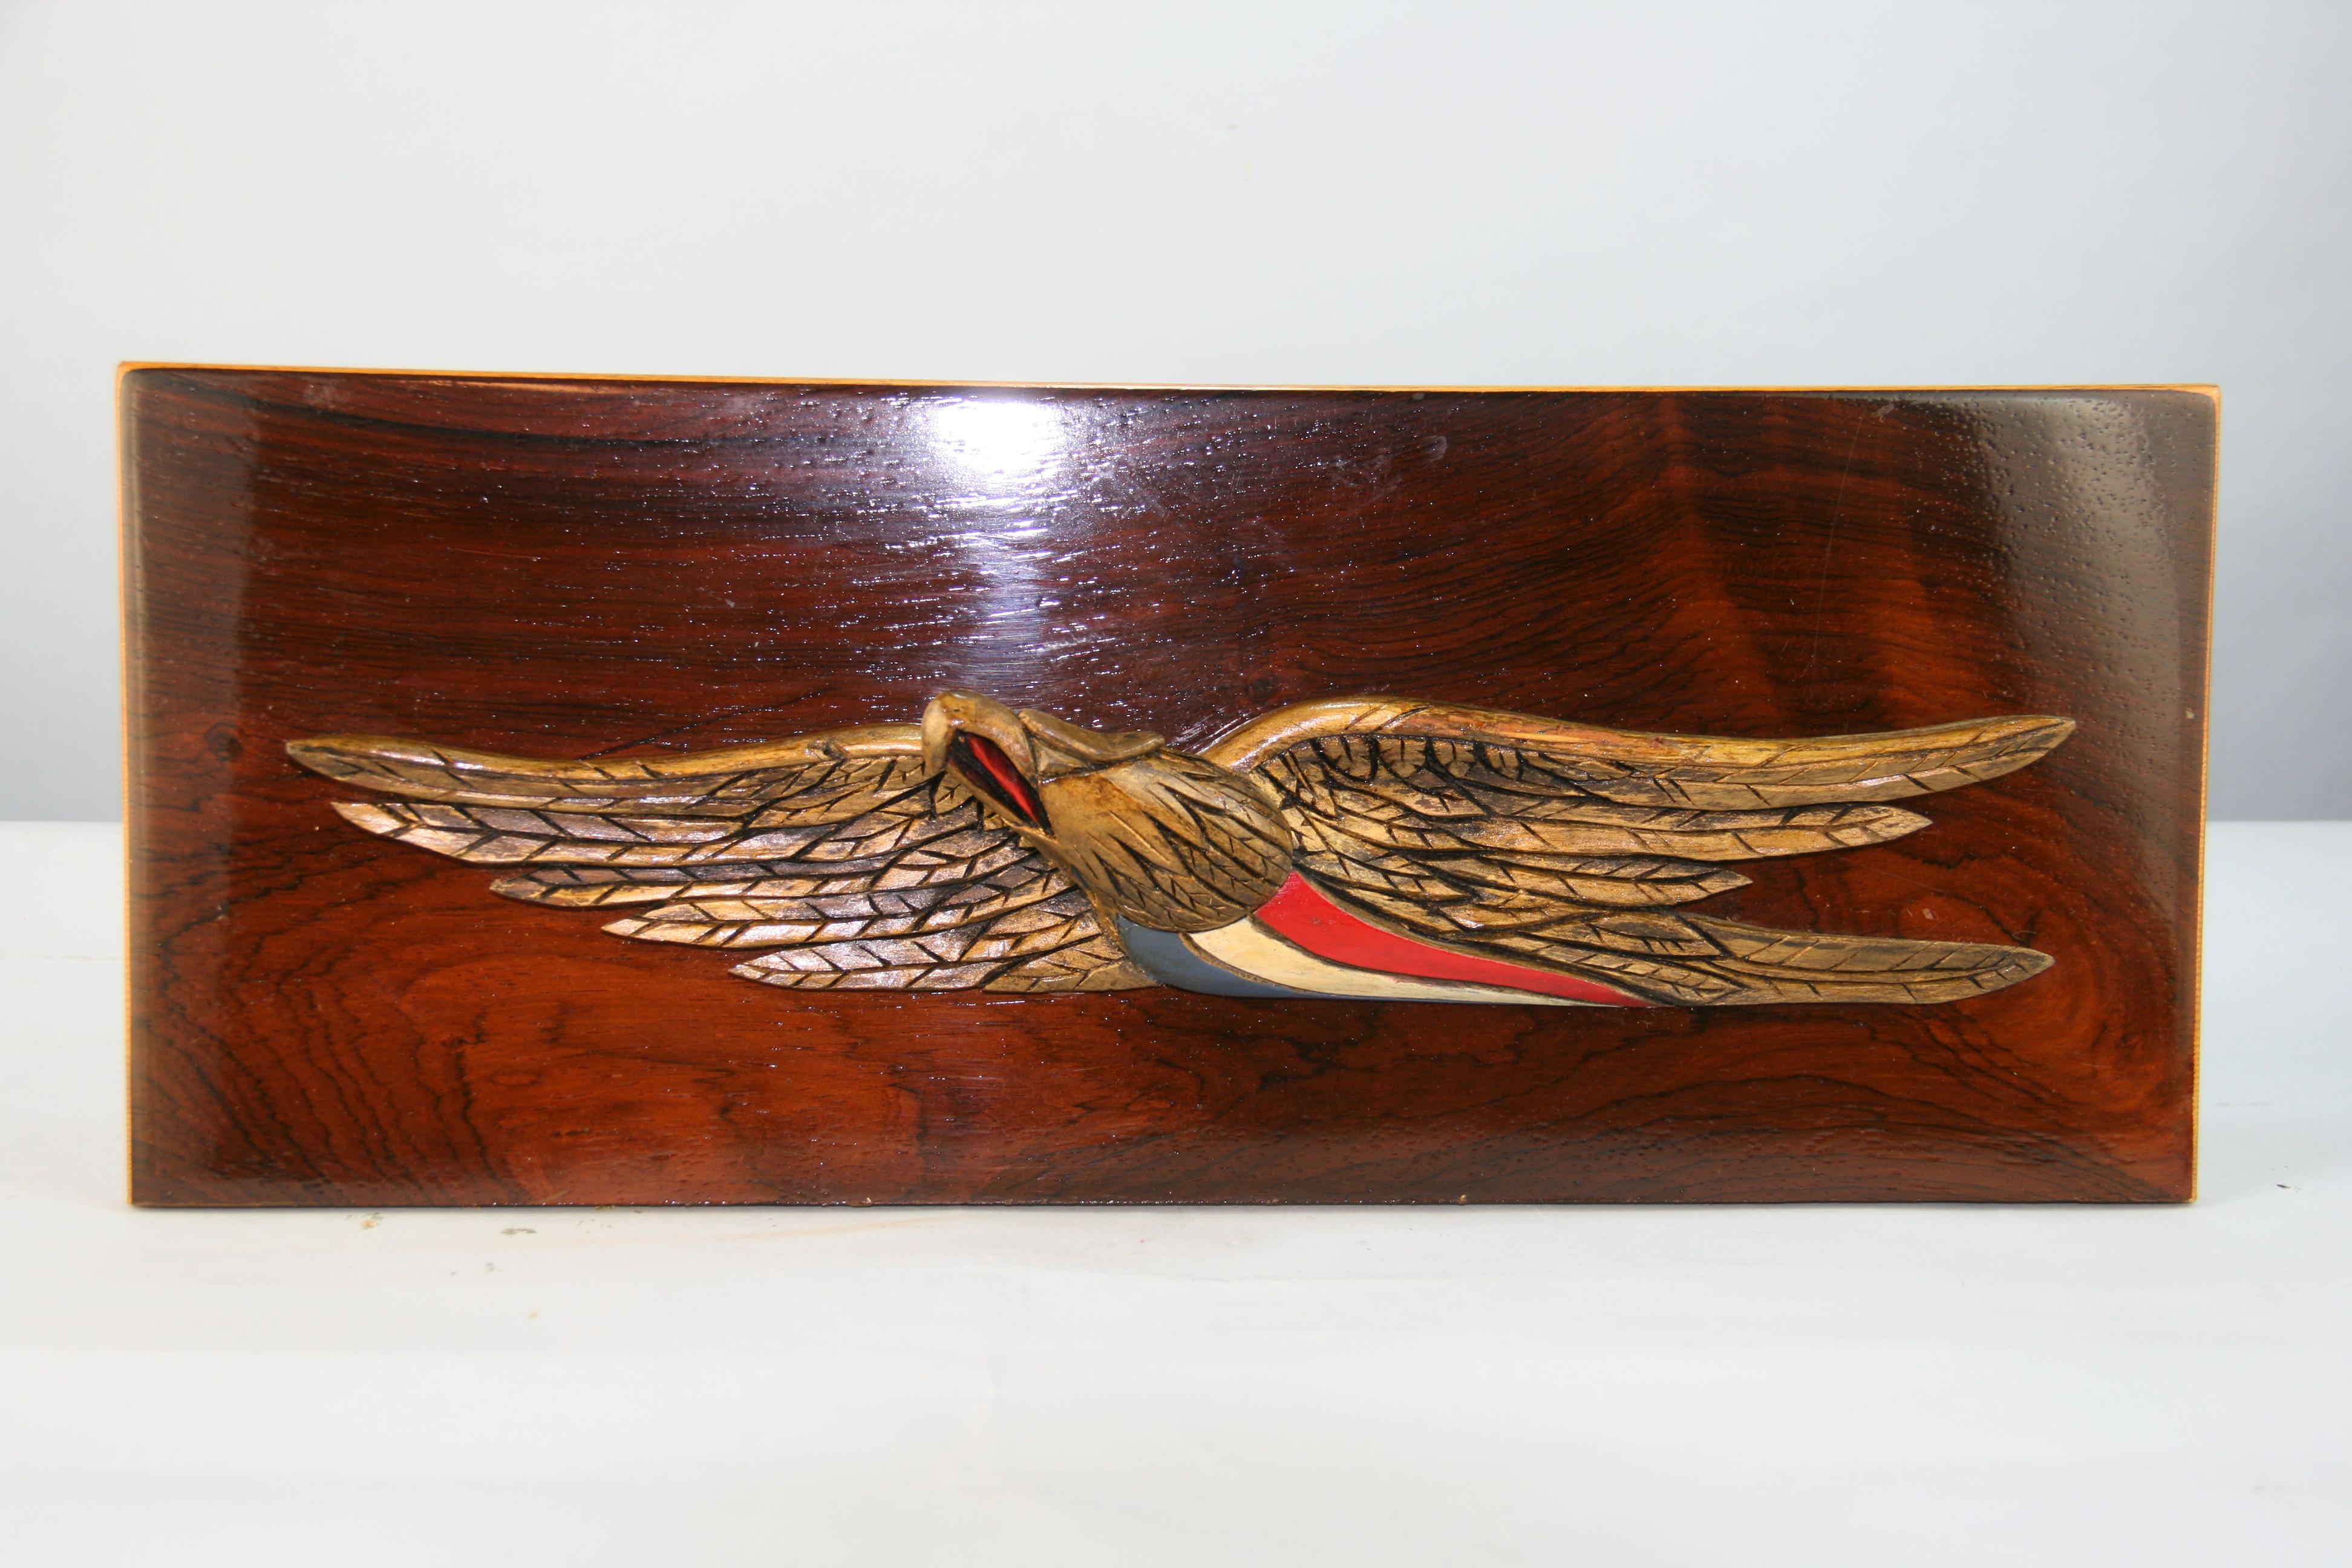 Hand carved wood eagle applied to wood panel.